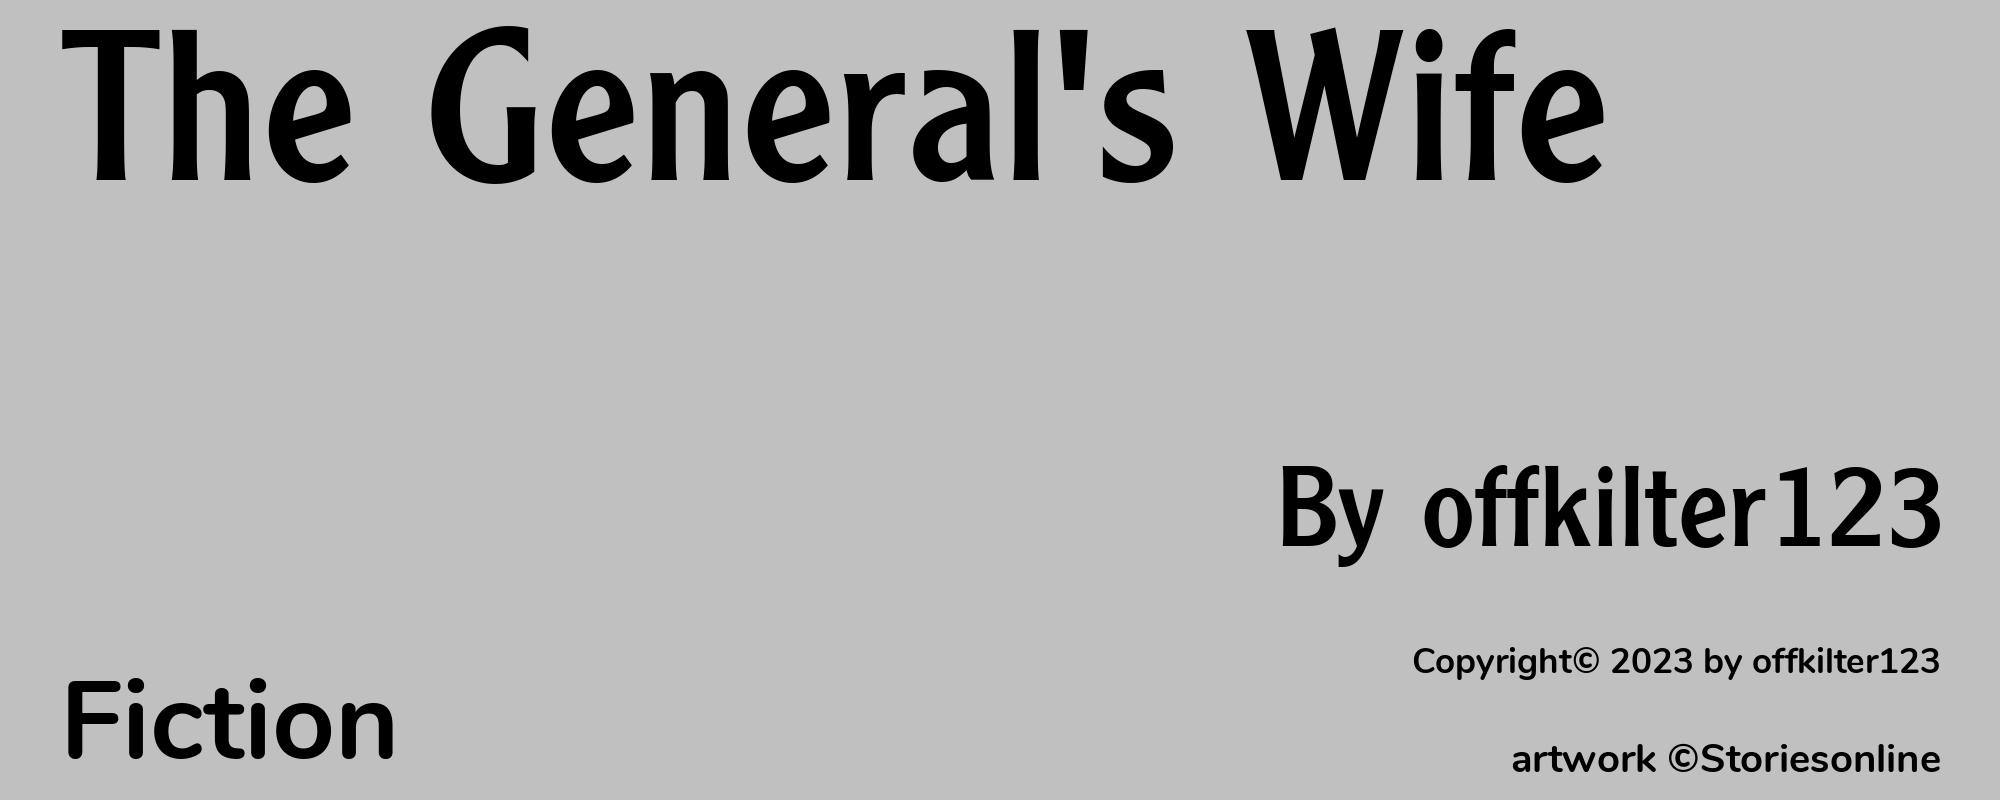 The General's Wife - Cover